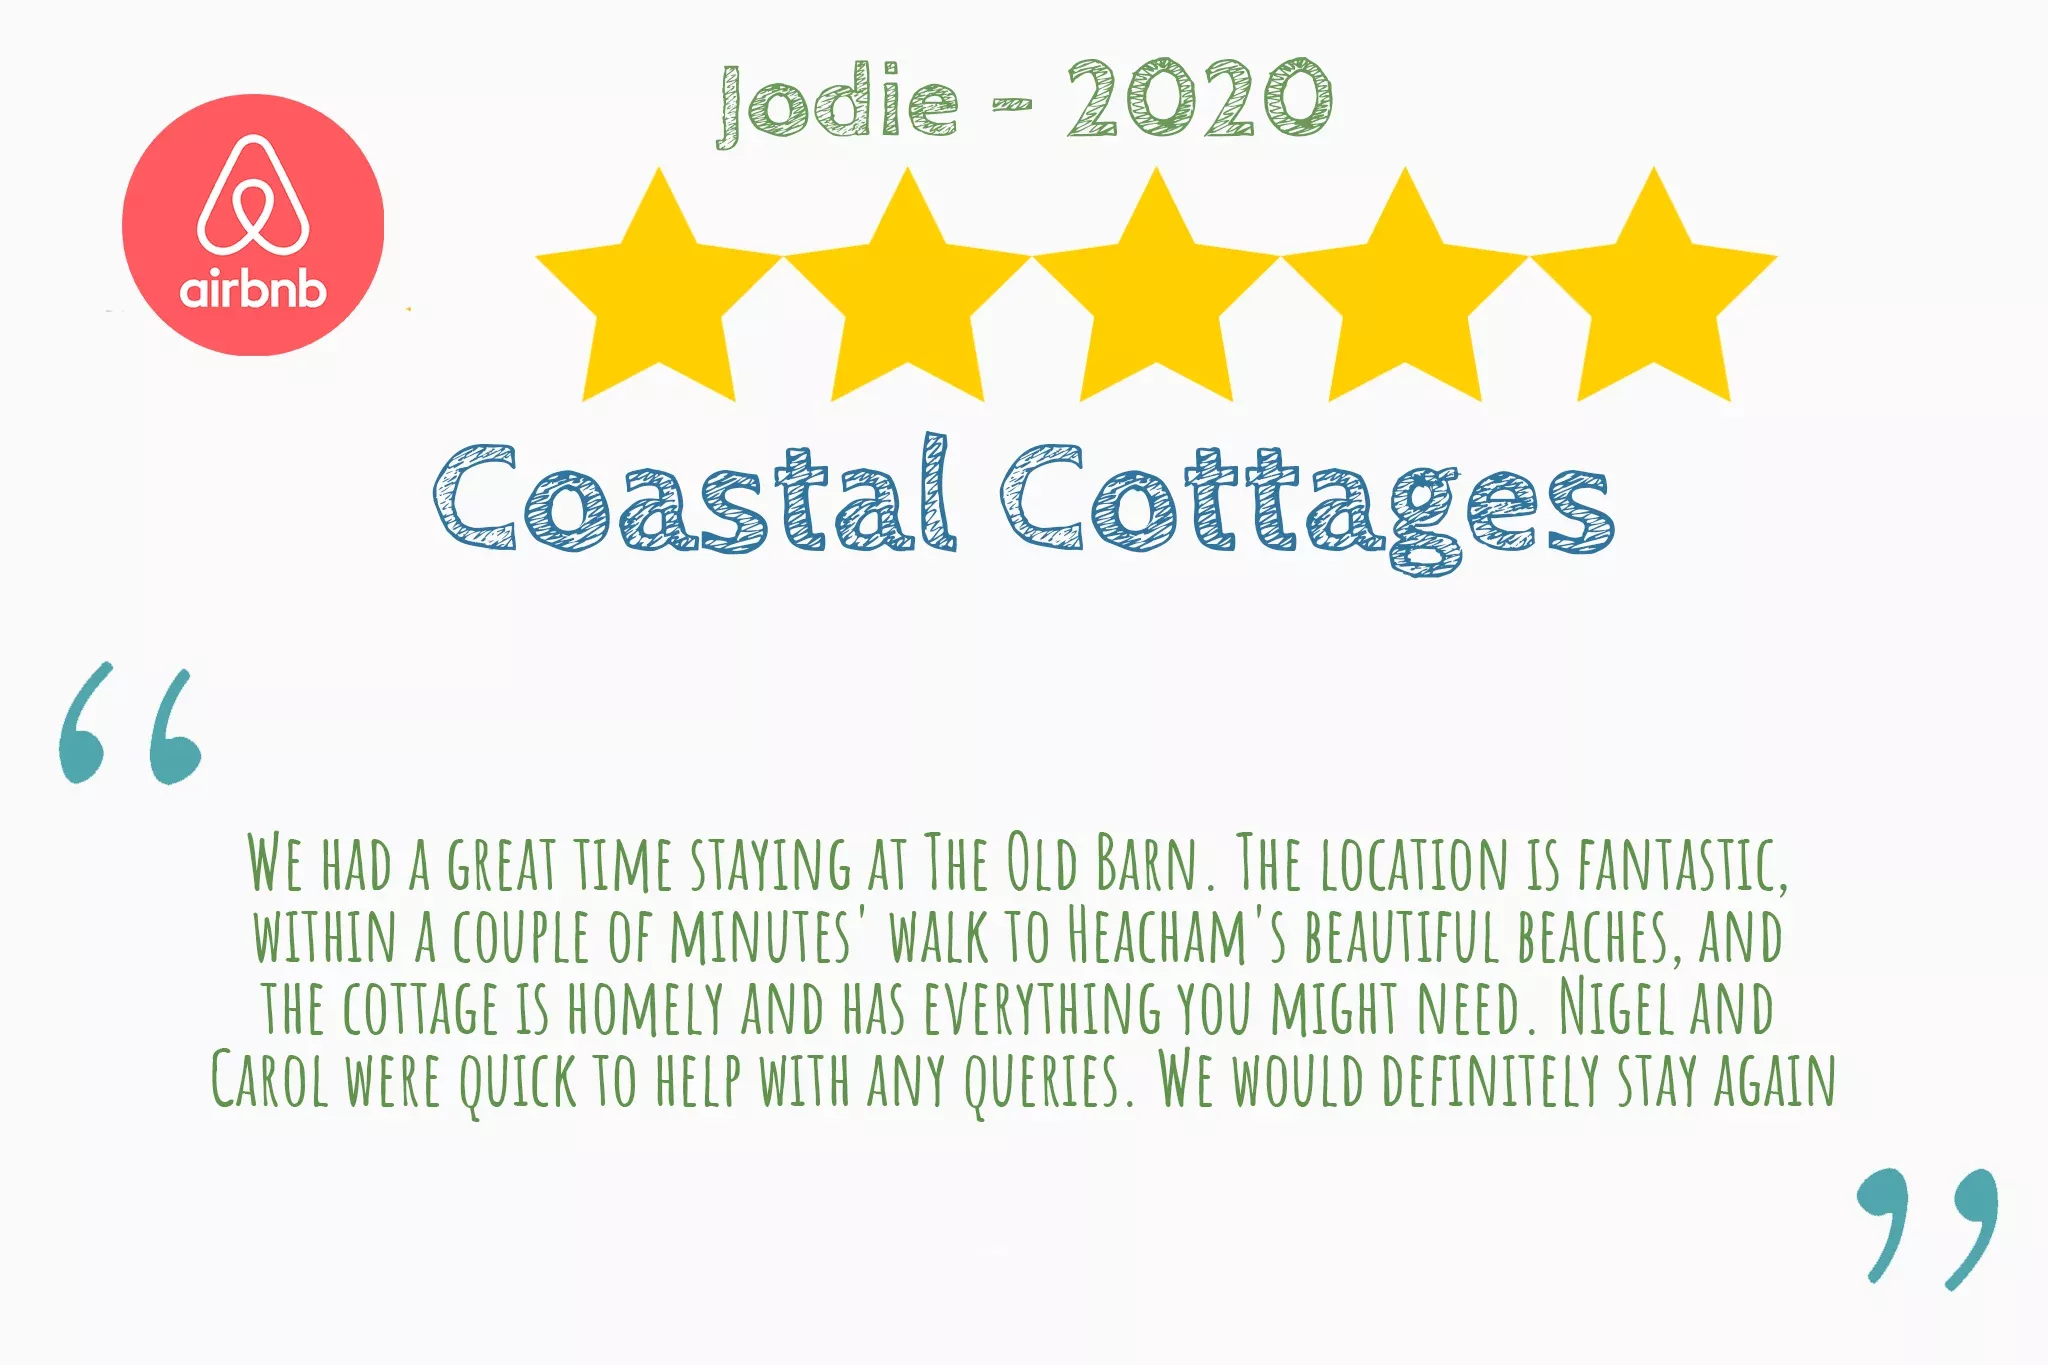 5 star Airbnb review from Jodie that says "We had a great time staying at The Old Barn. The location is fantastic,  within a couple of minutes' walk to Heacham's beautiful beaches, and  the cottage is homely and has everything you might need. Nigel and  Carol were quick to help with any queries. We would definitely stay again"